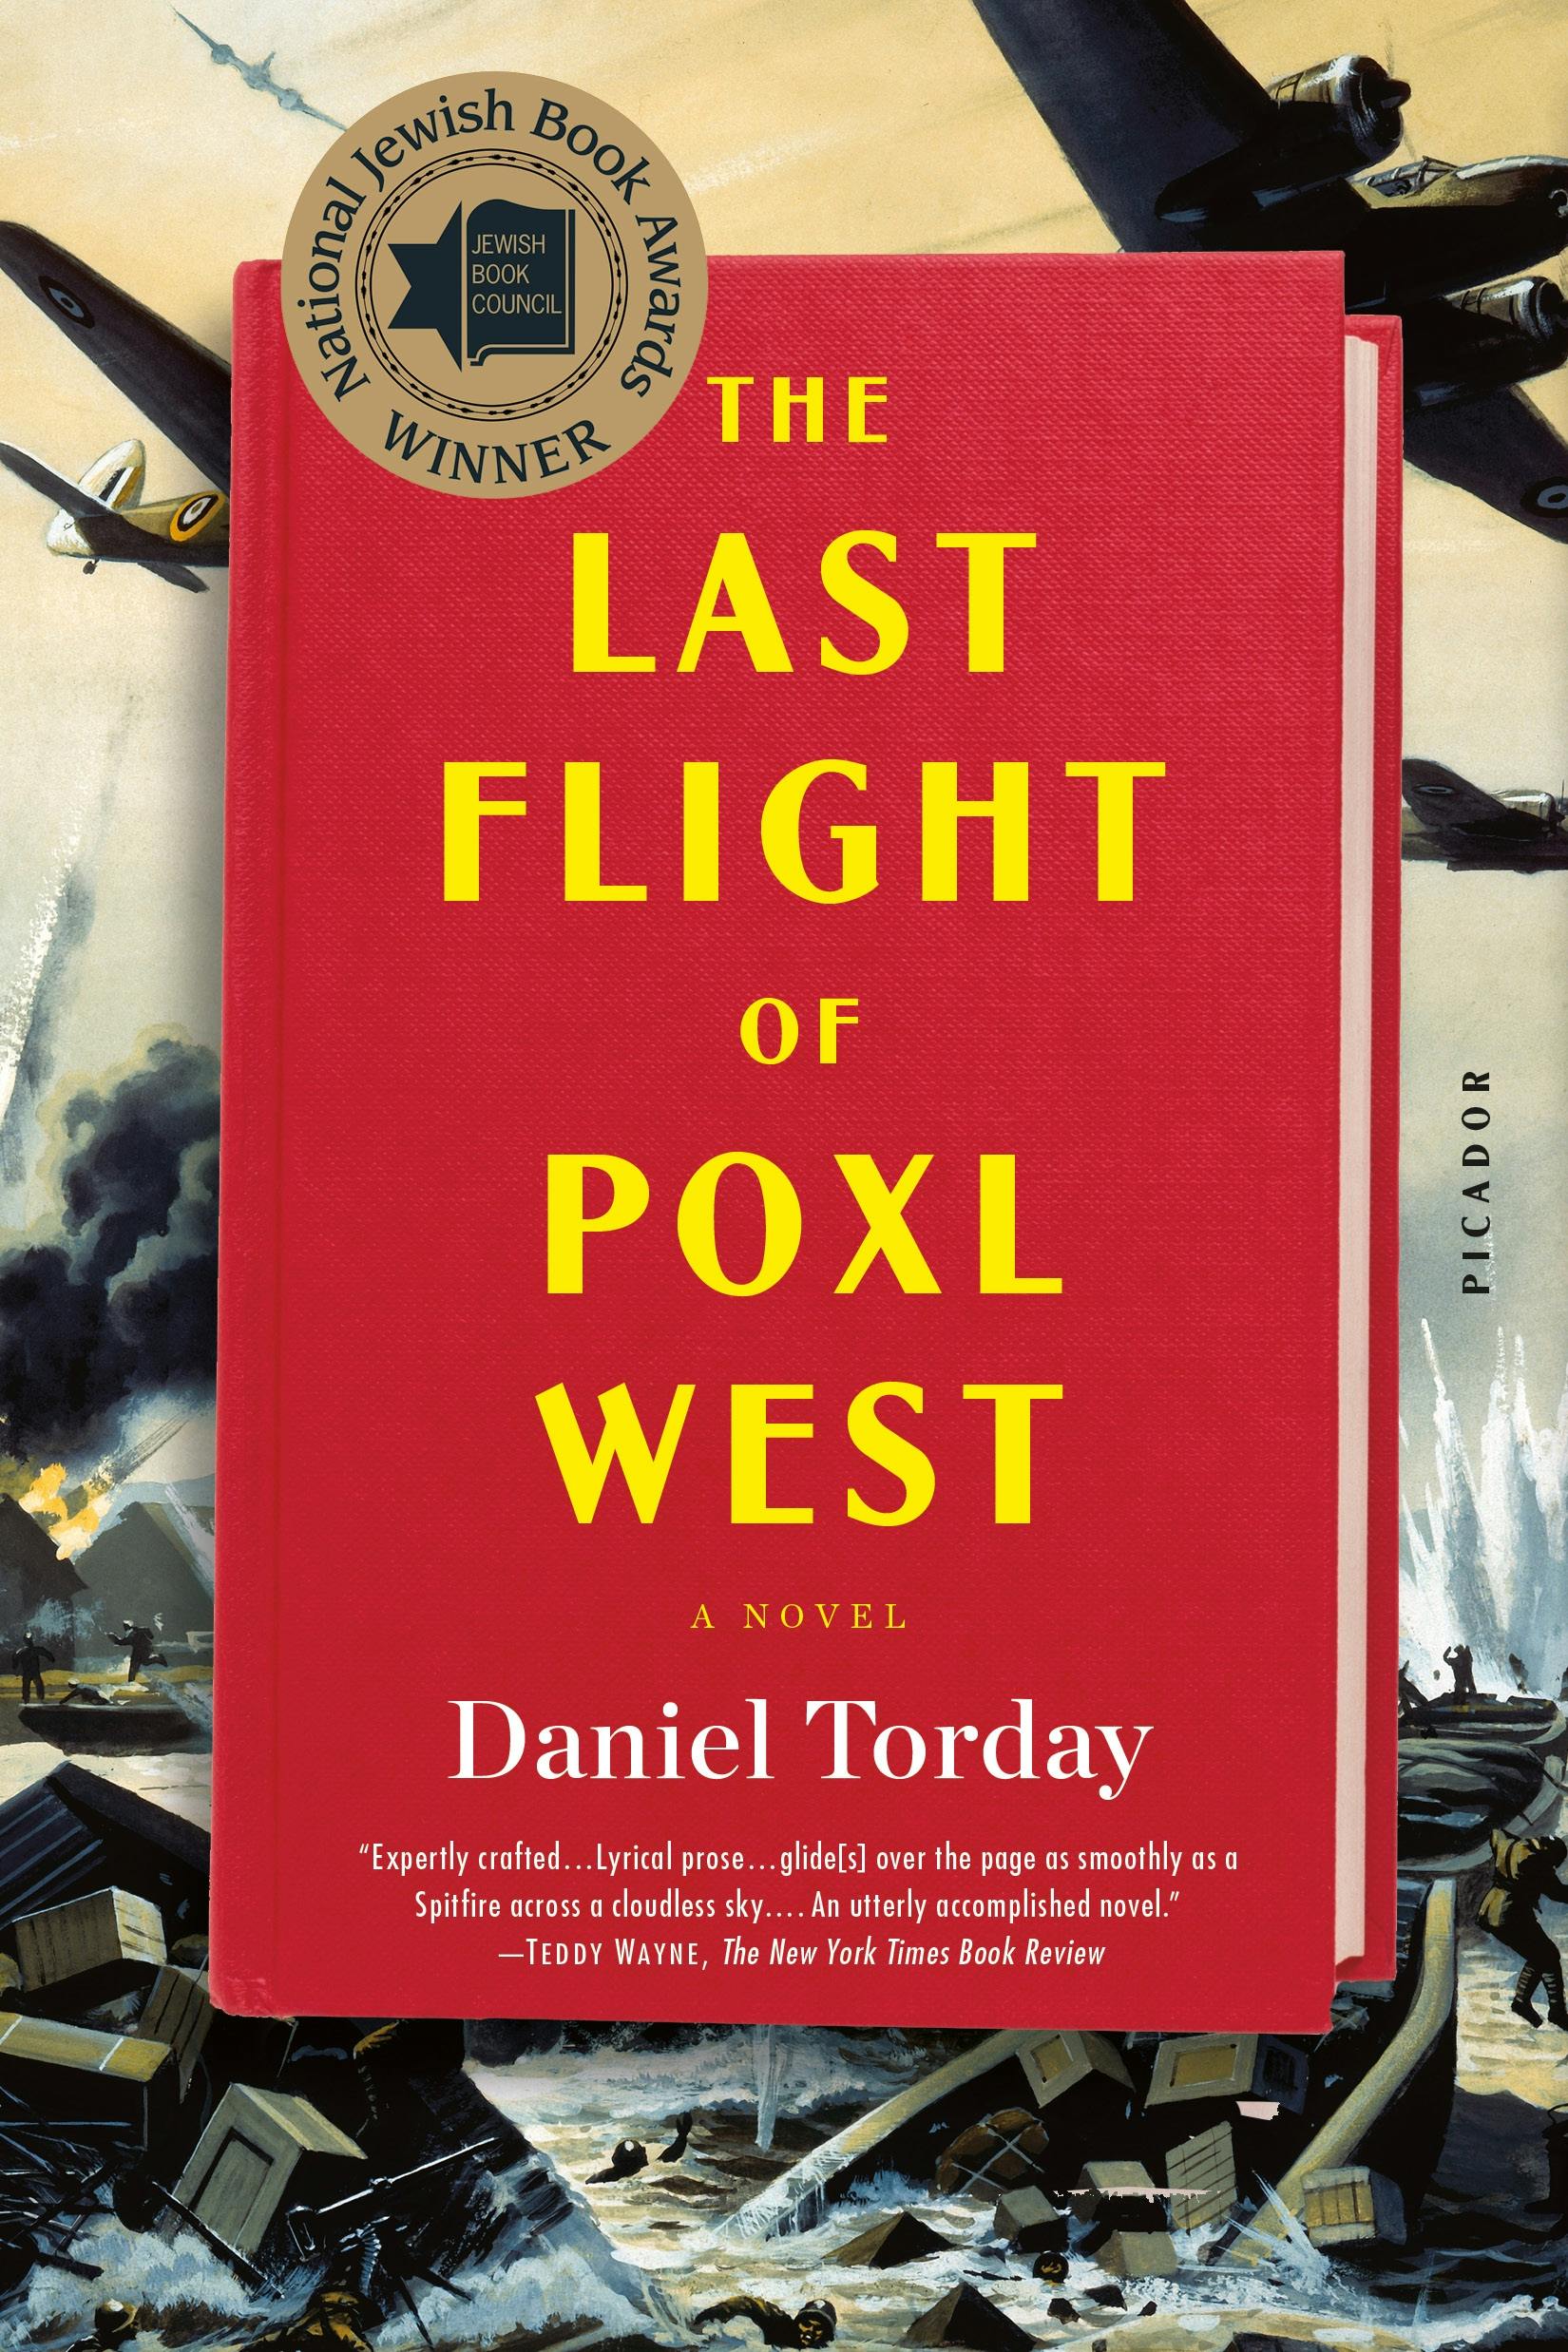 The Last Flight of Poxl West pic photo